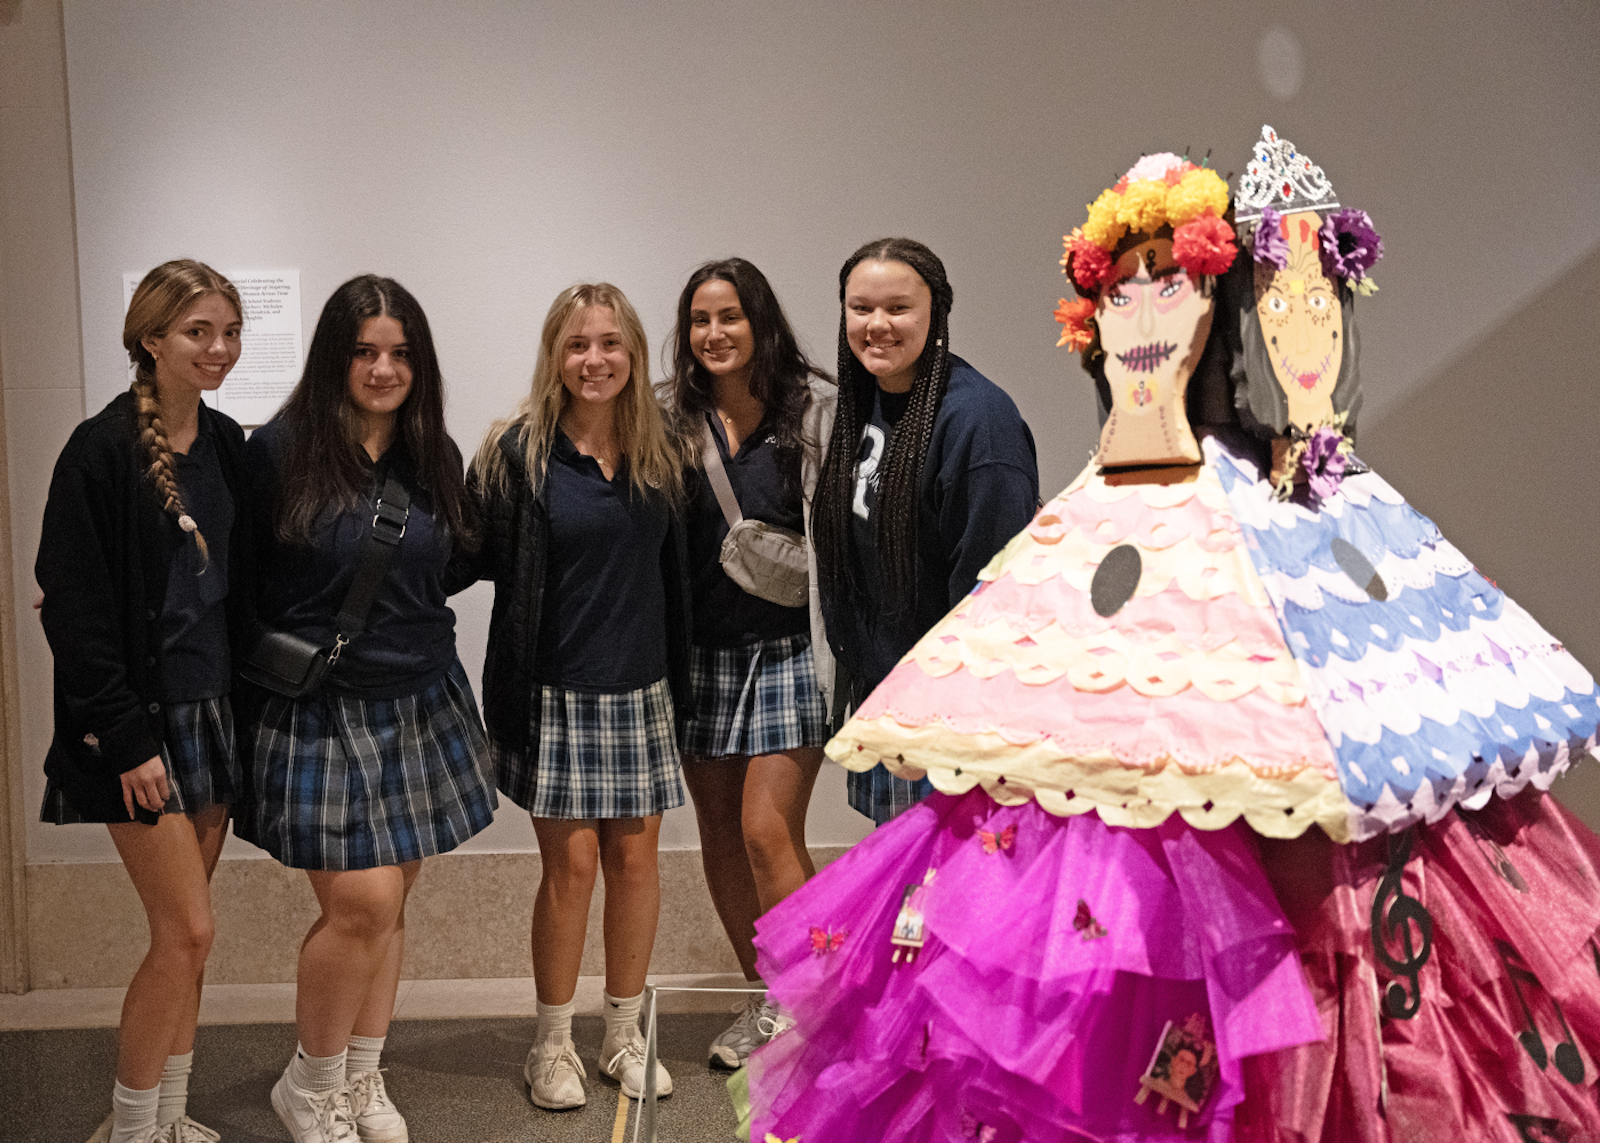 Regina High School students pose near their display during a class visit to the Detroit Institute of Arts on Oct. 24.